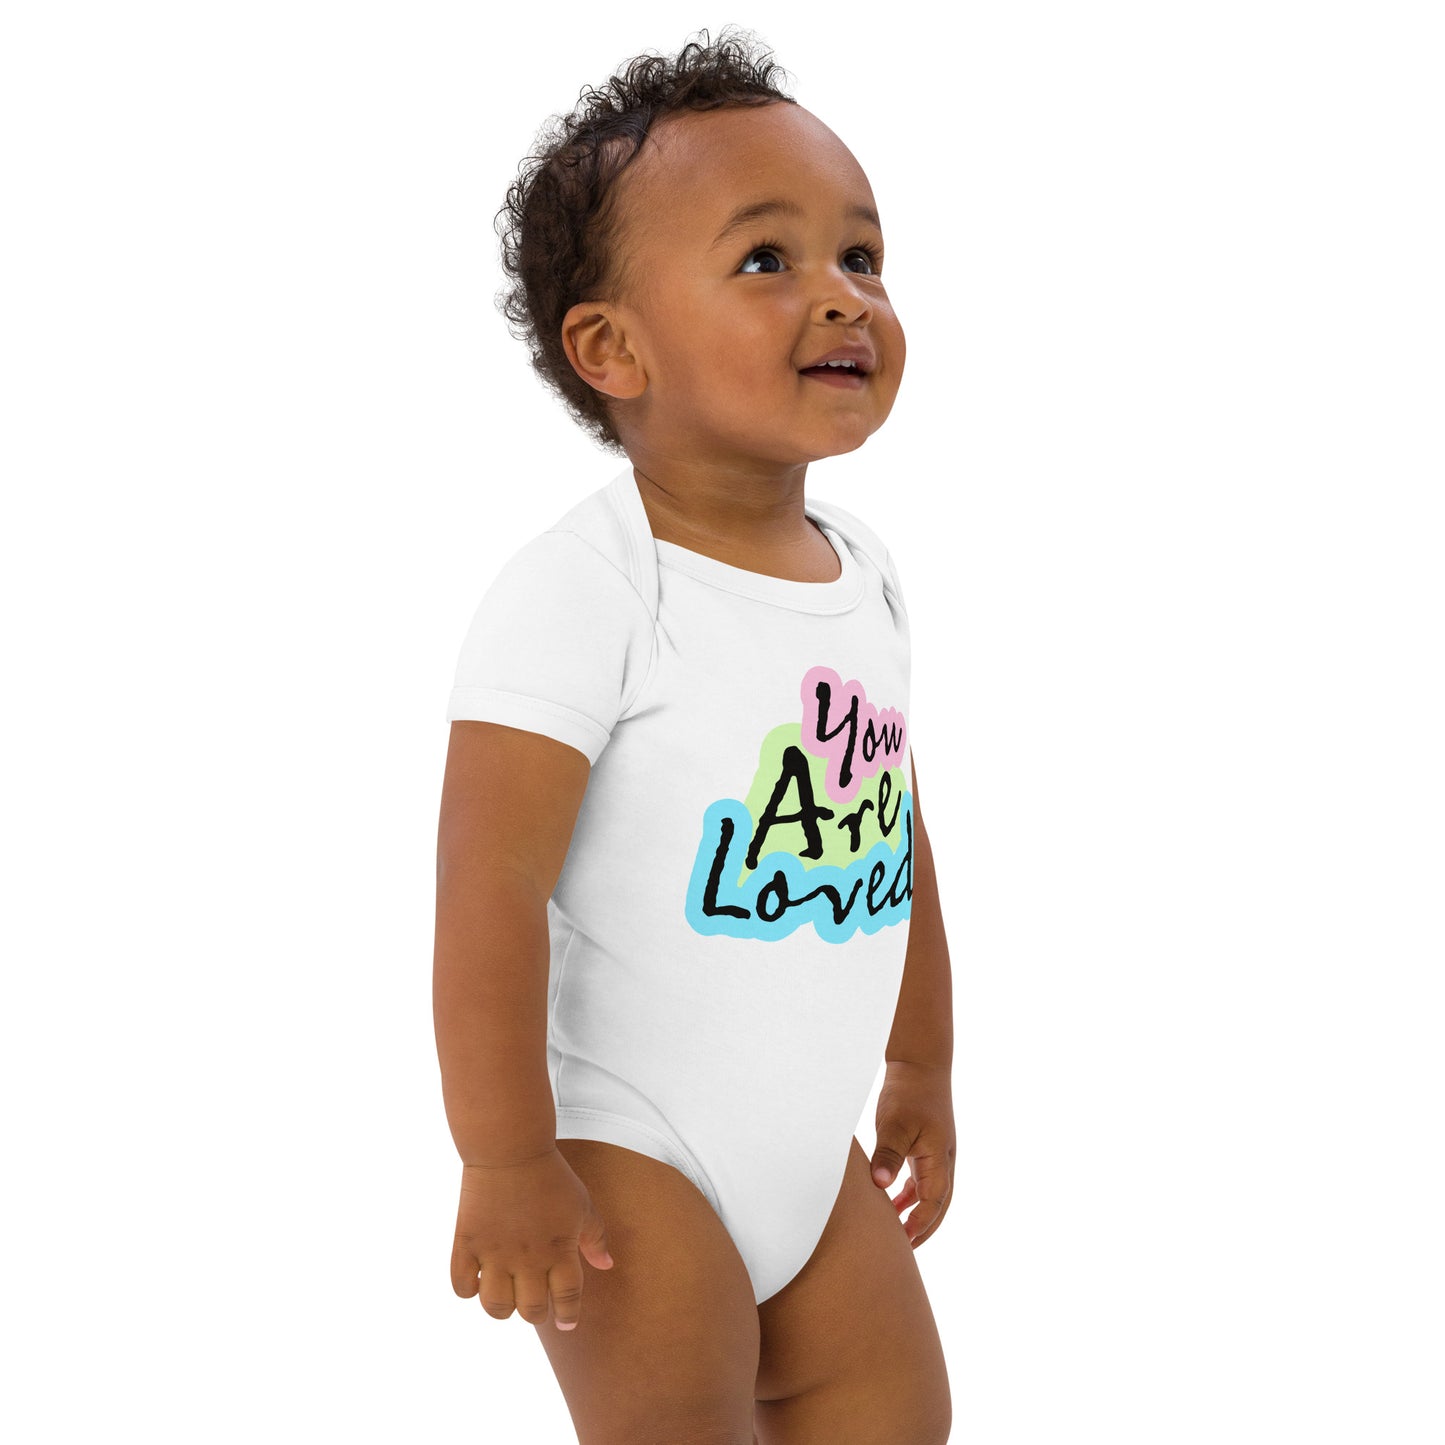 Organic cotton "You Are Loved" Onesie